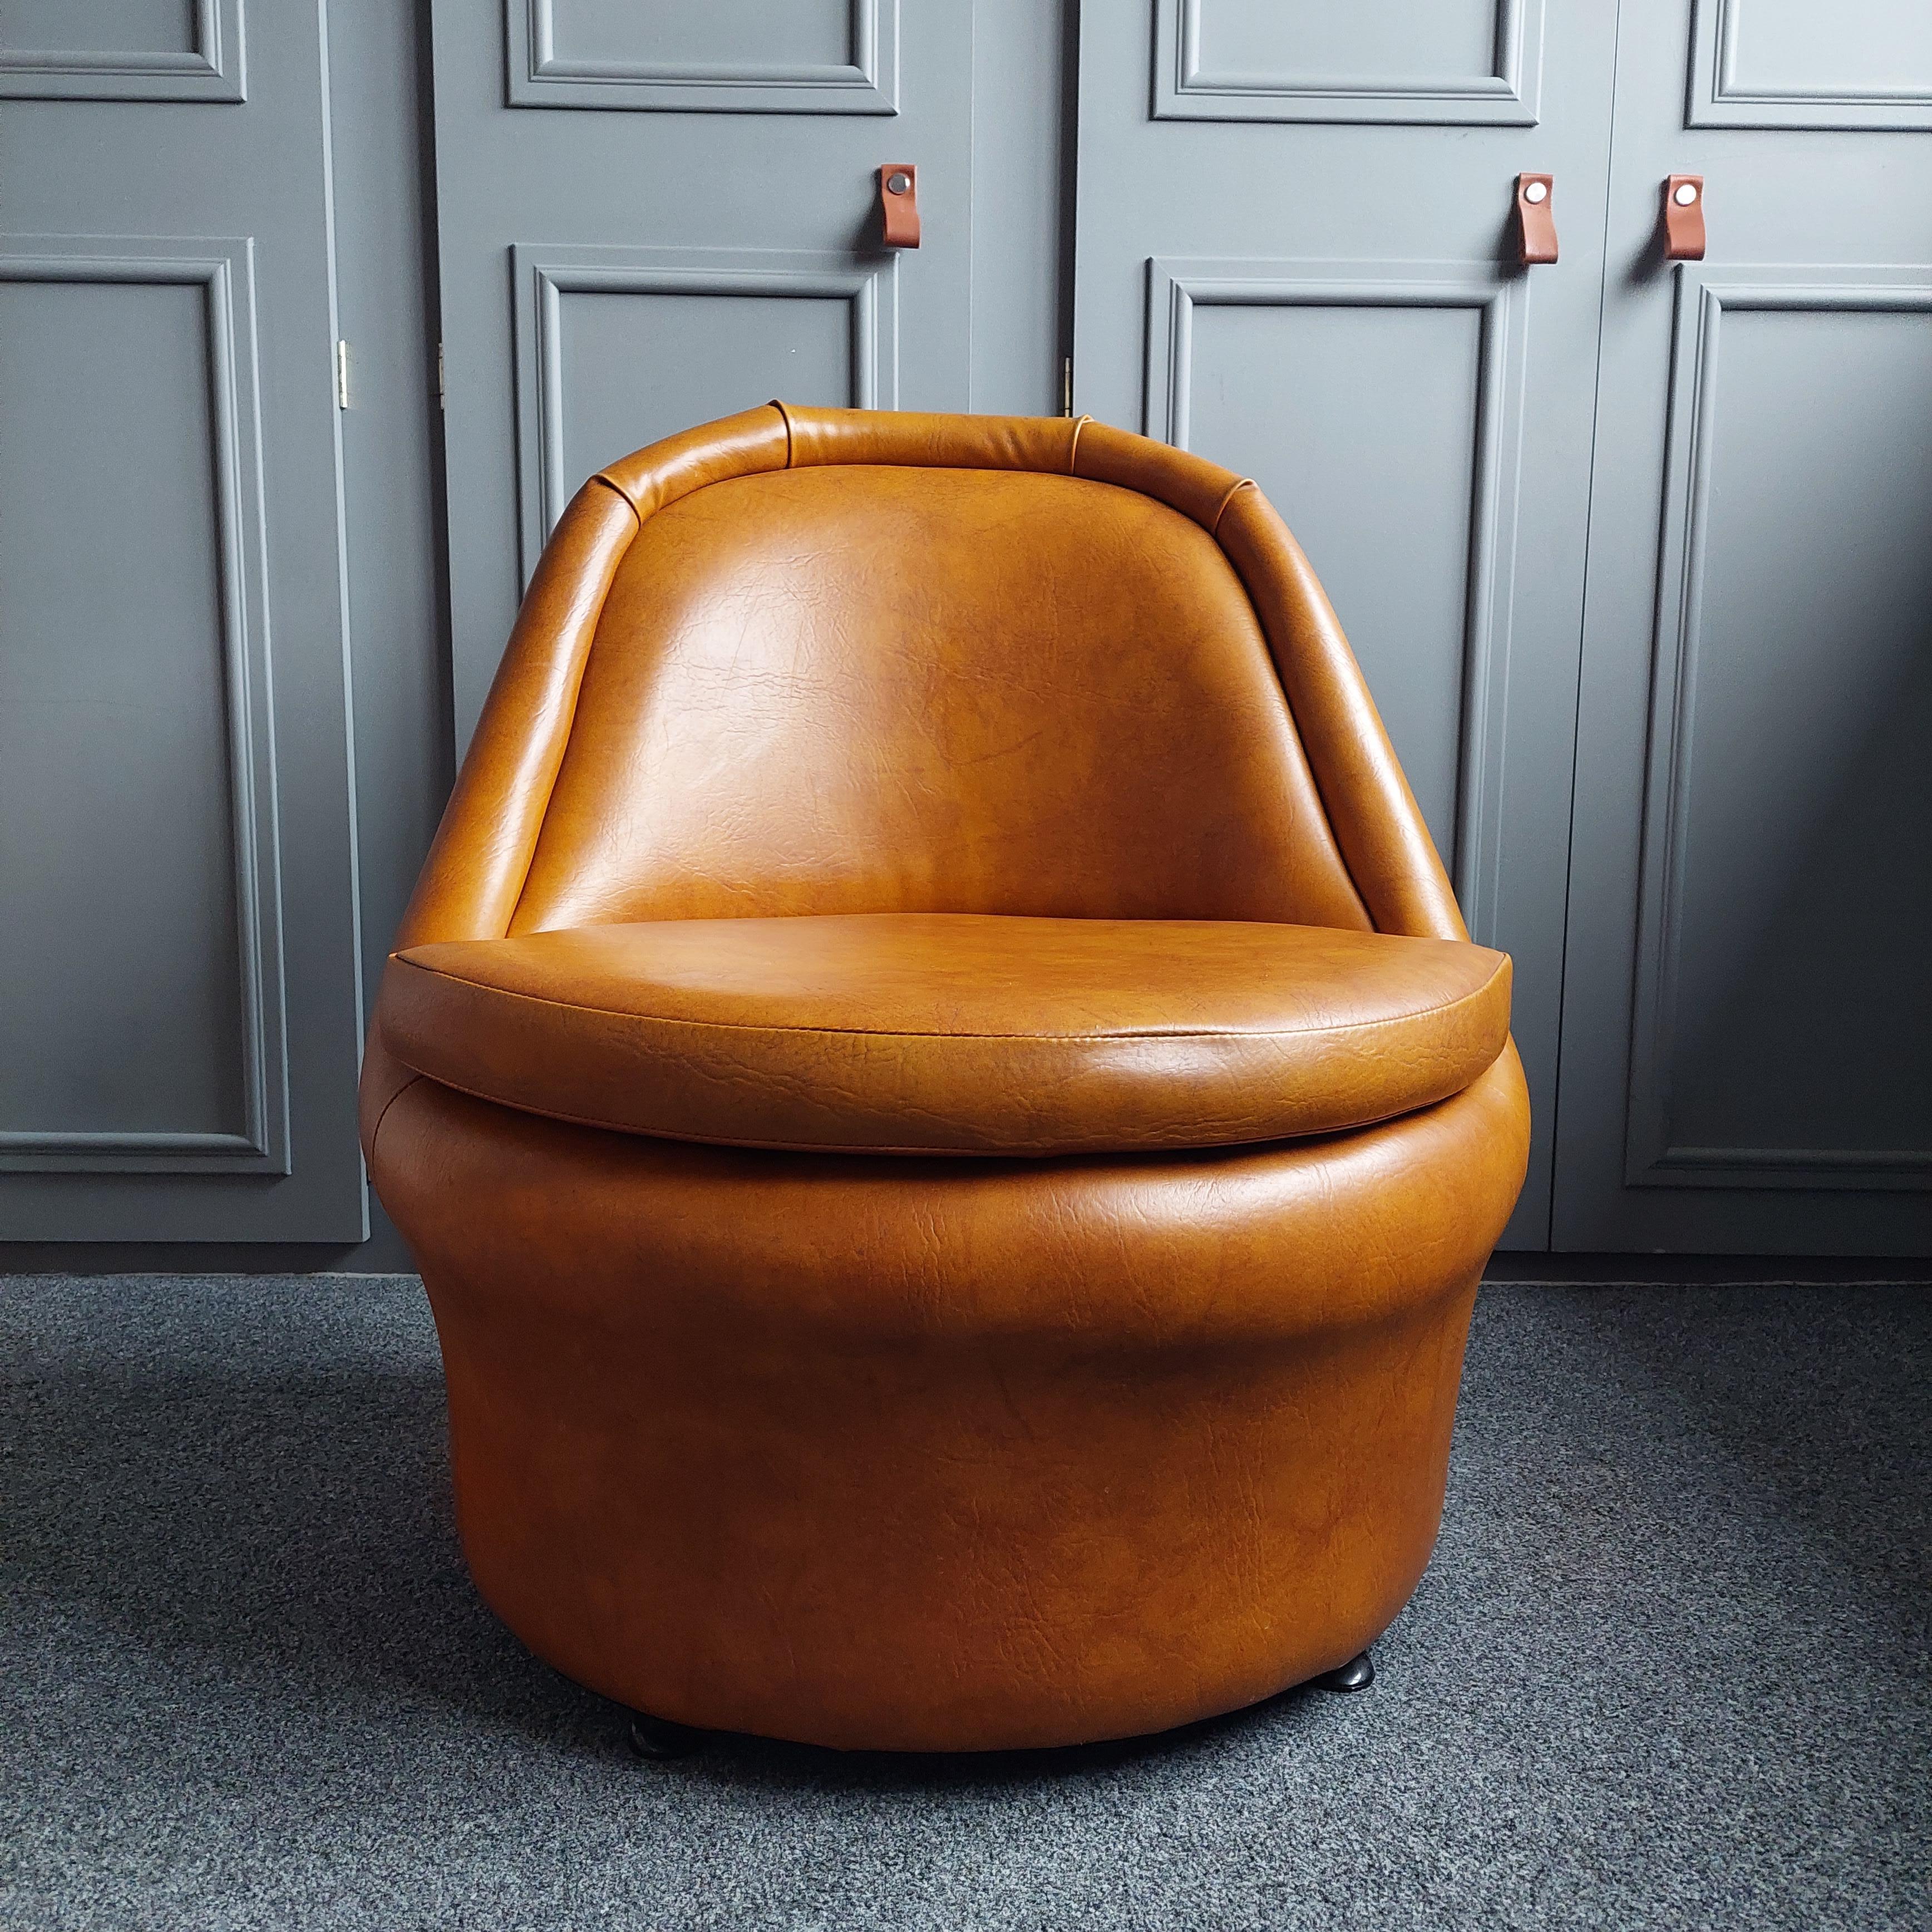 Stunning Tan Leatherette British Cocktail Chair, with the most amazing shape and colour.
Made in England by Sherbourne there are lots of examples of these but we have never seen one with this upholstery before.
It's a rare find, chairs were probably